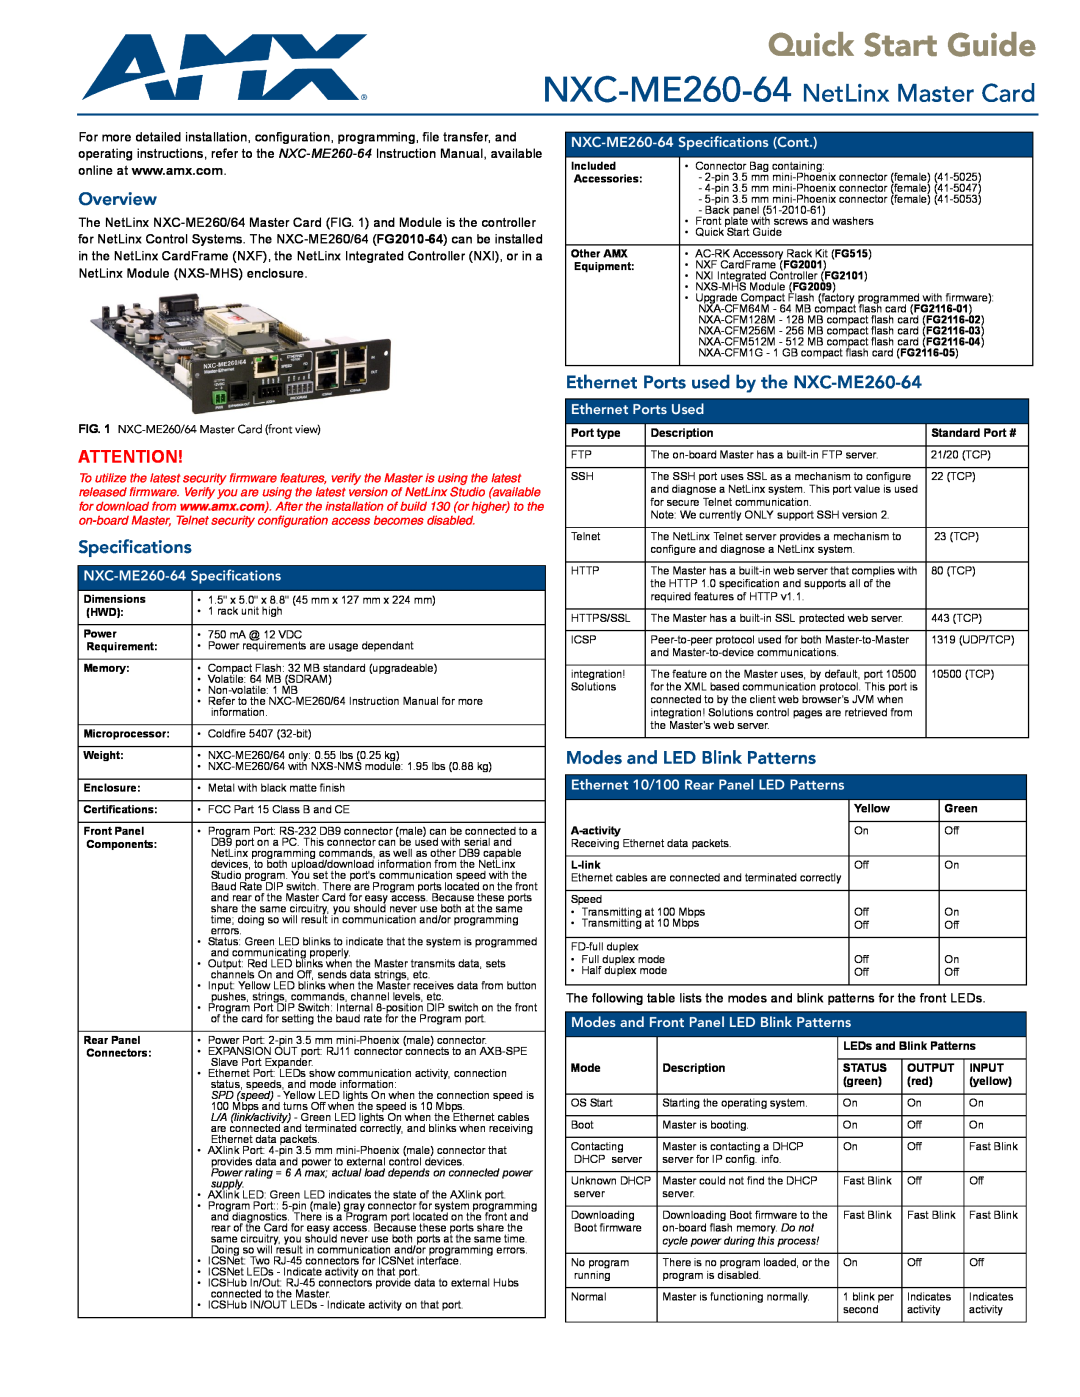 AMX quick start Overview, Specifications, Ethernet Ports used by the NXC-ME260-64, Modes and LED Blink Patterns 